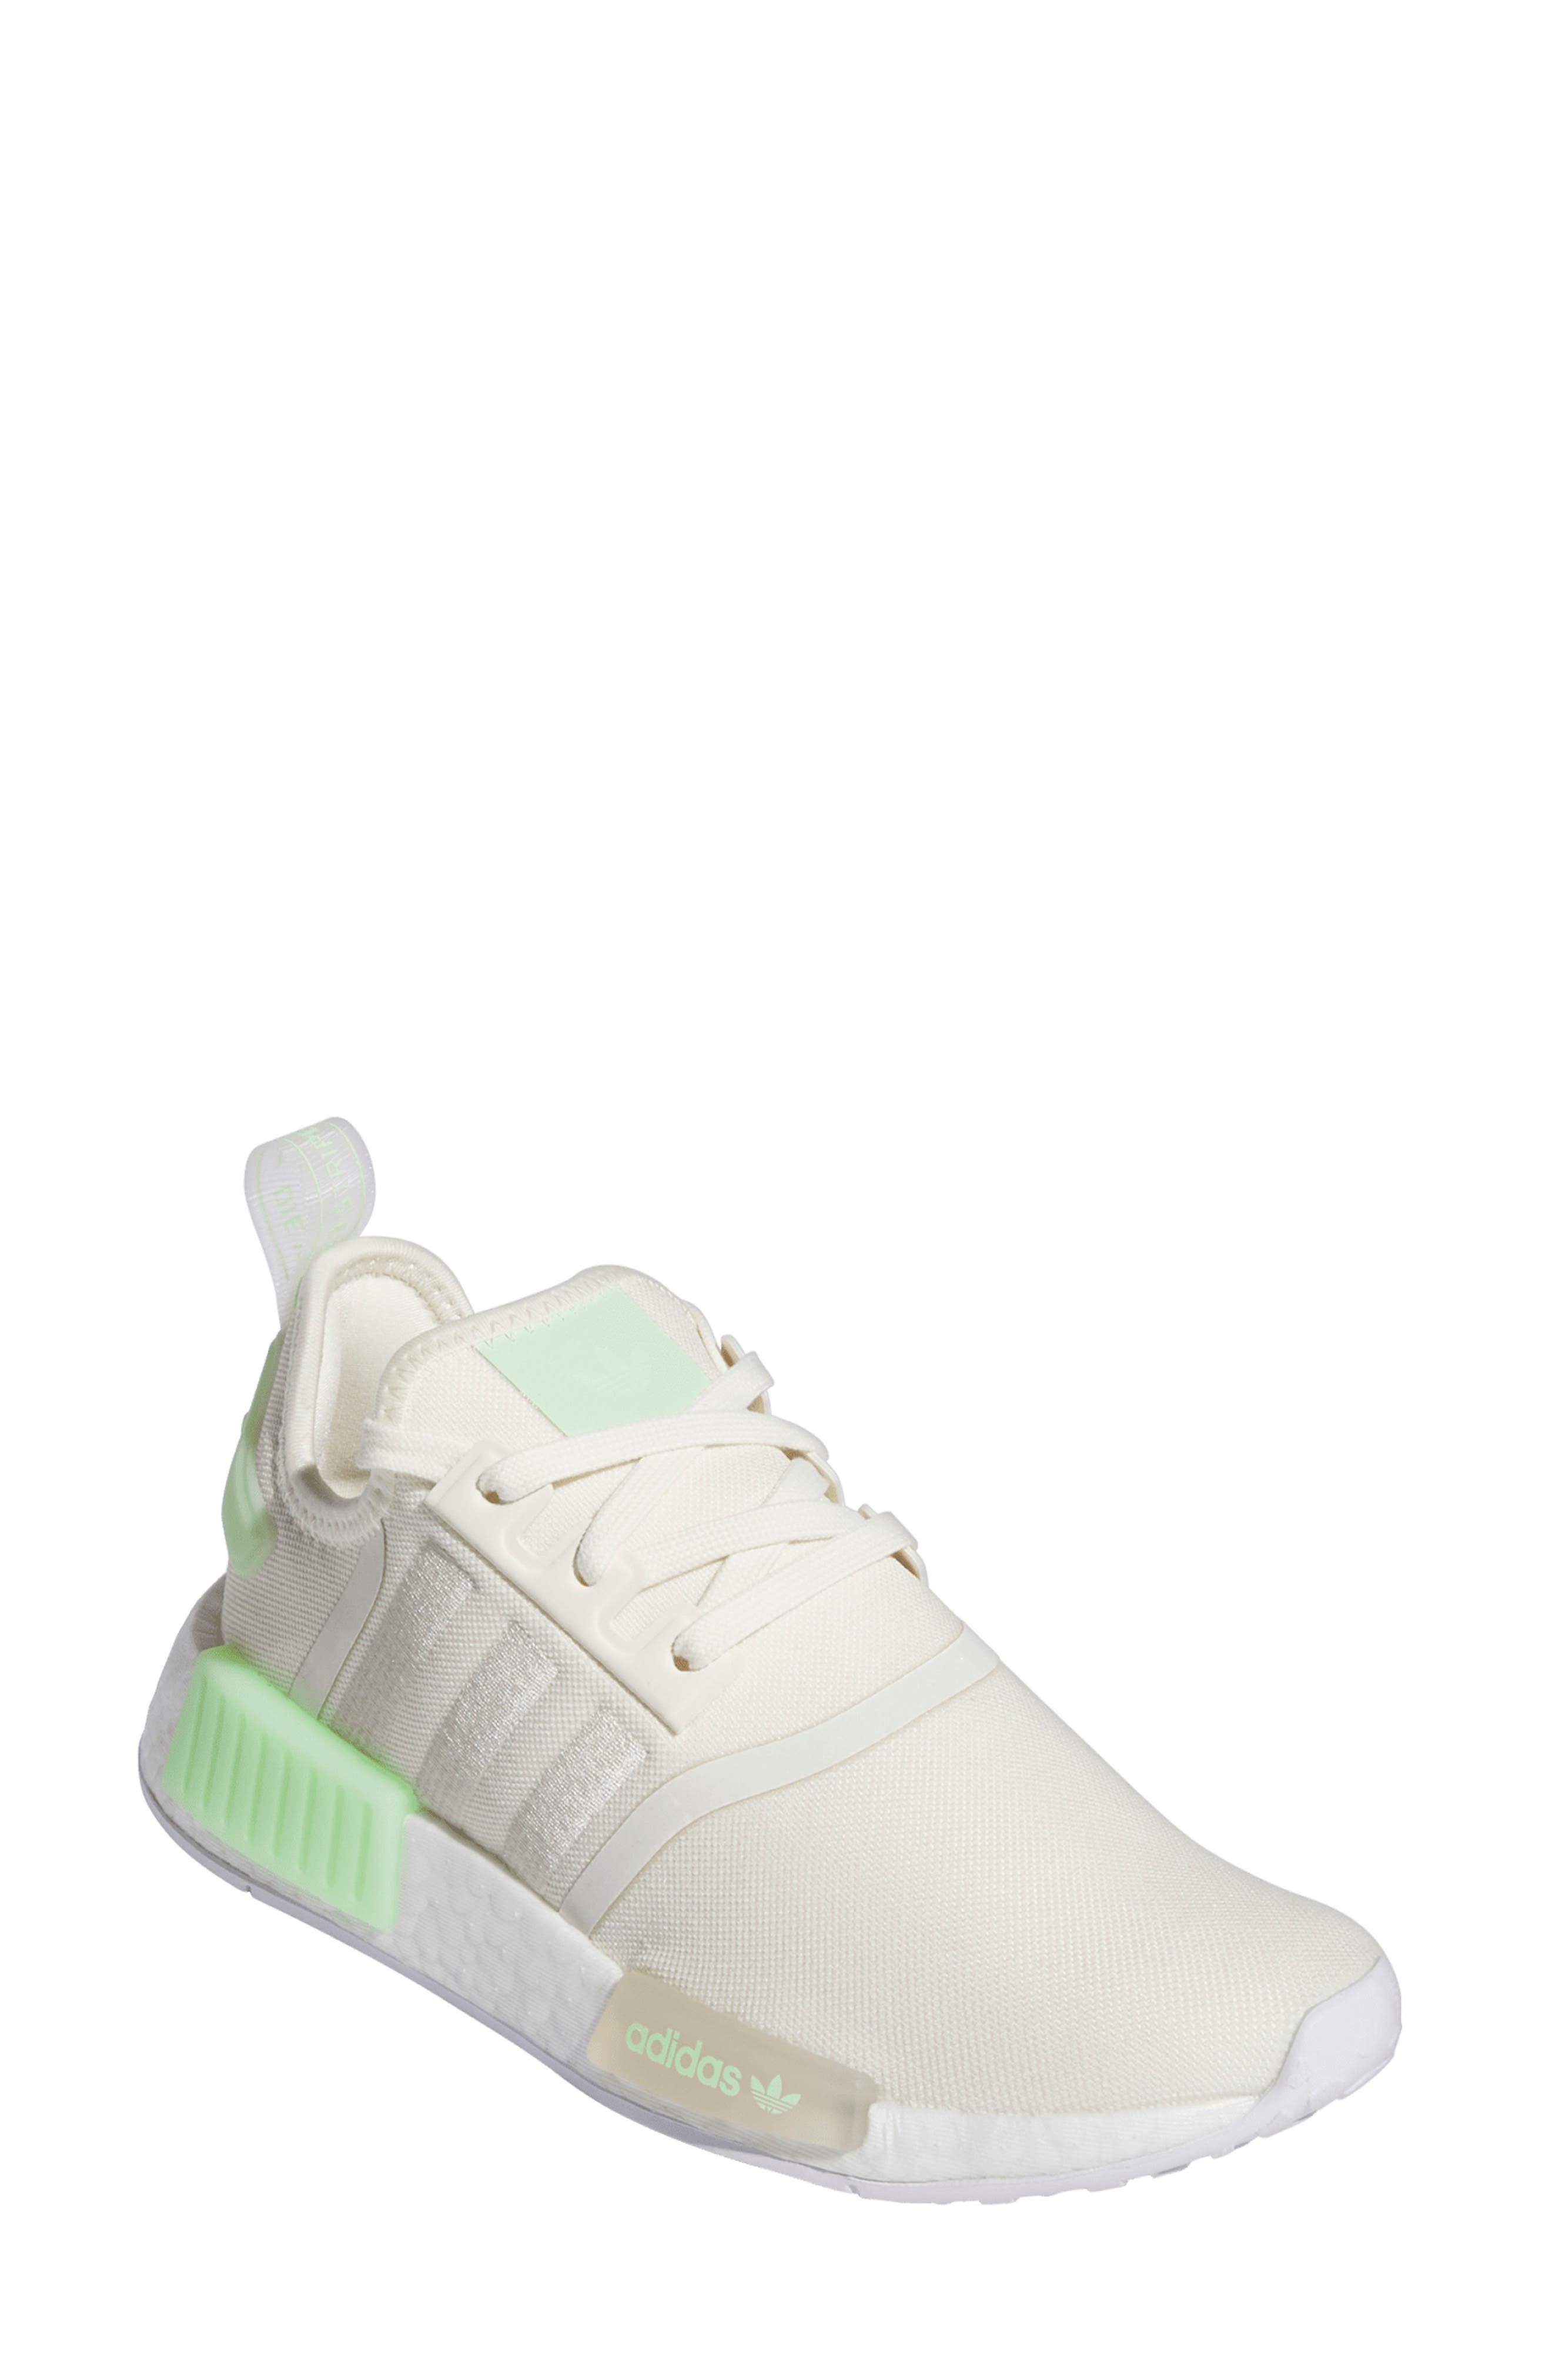 adidas womens sneakers nmd r1